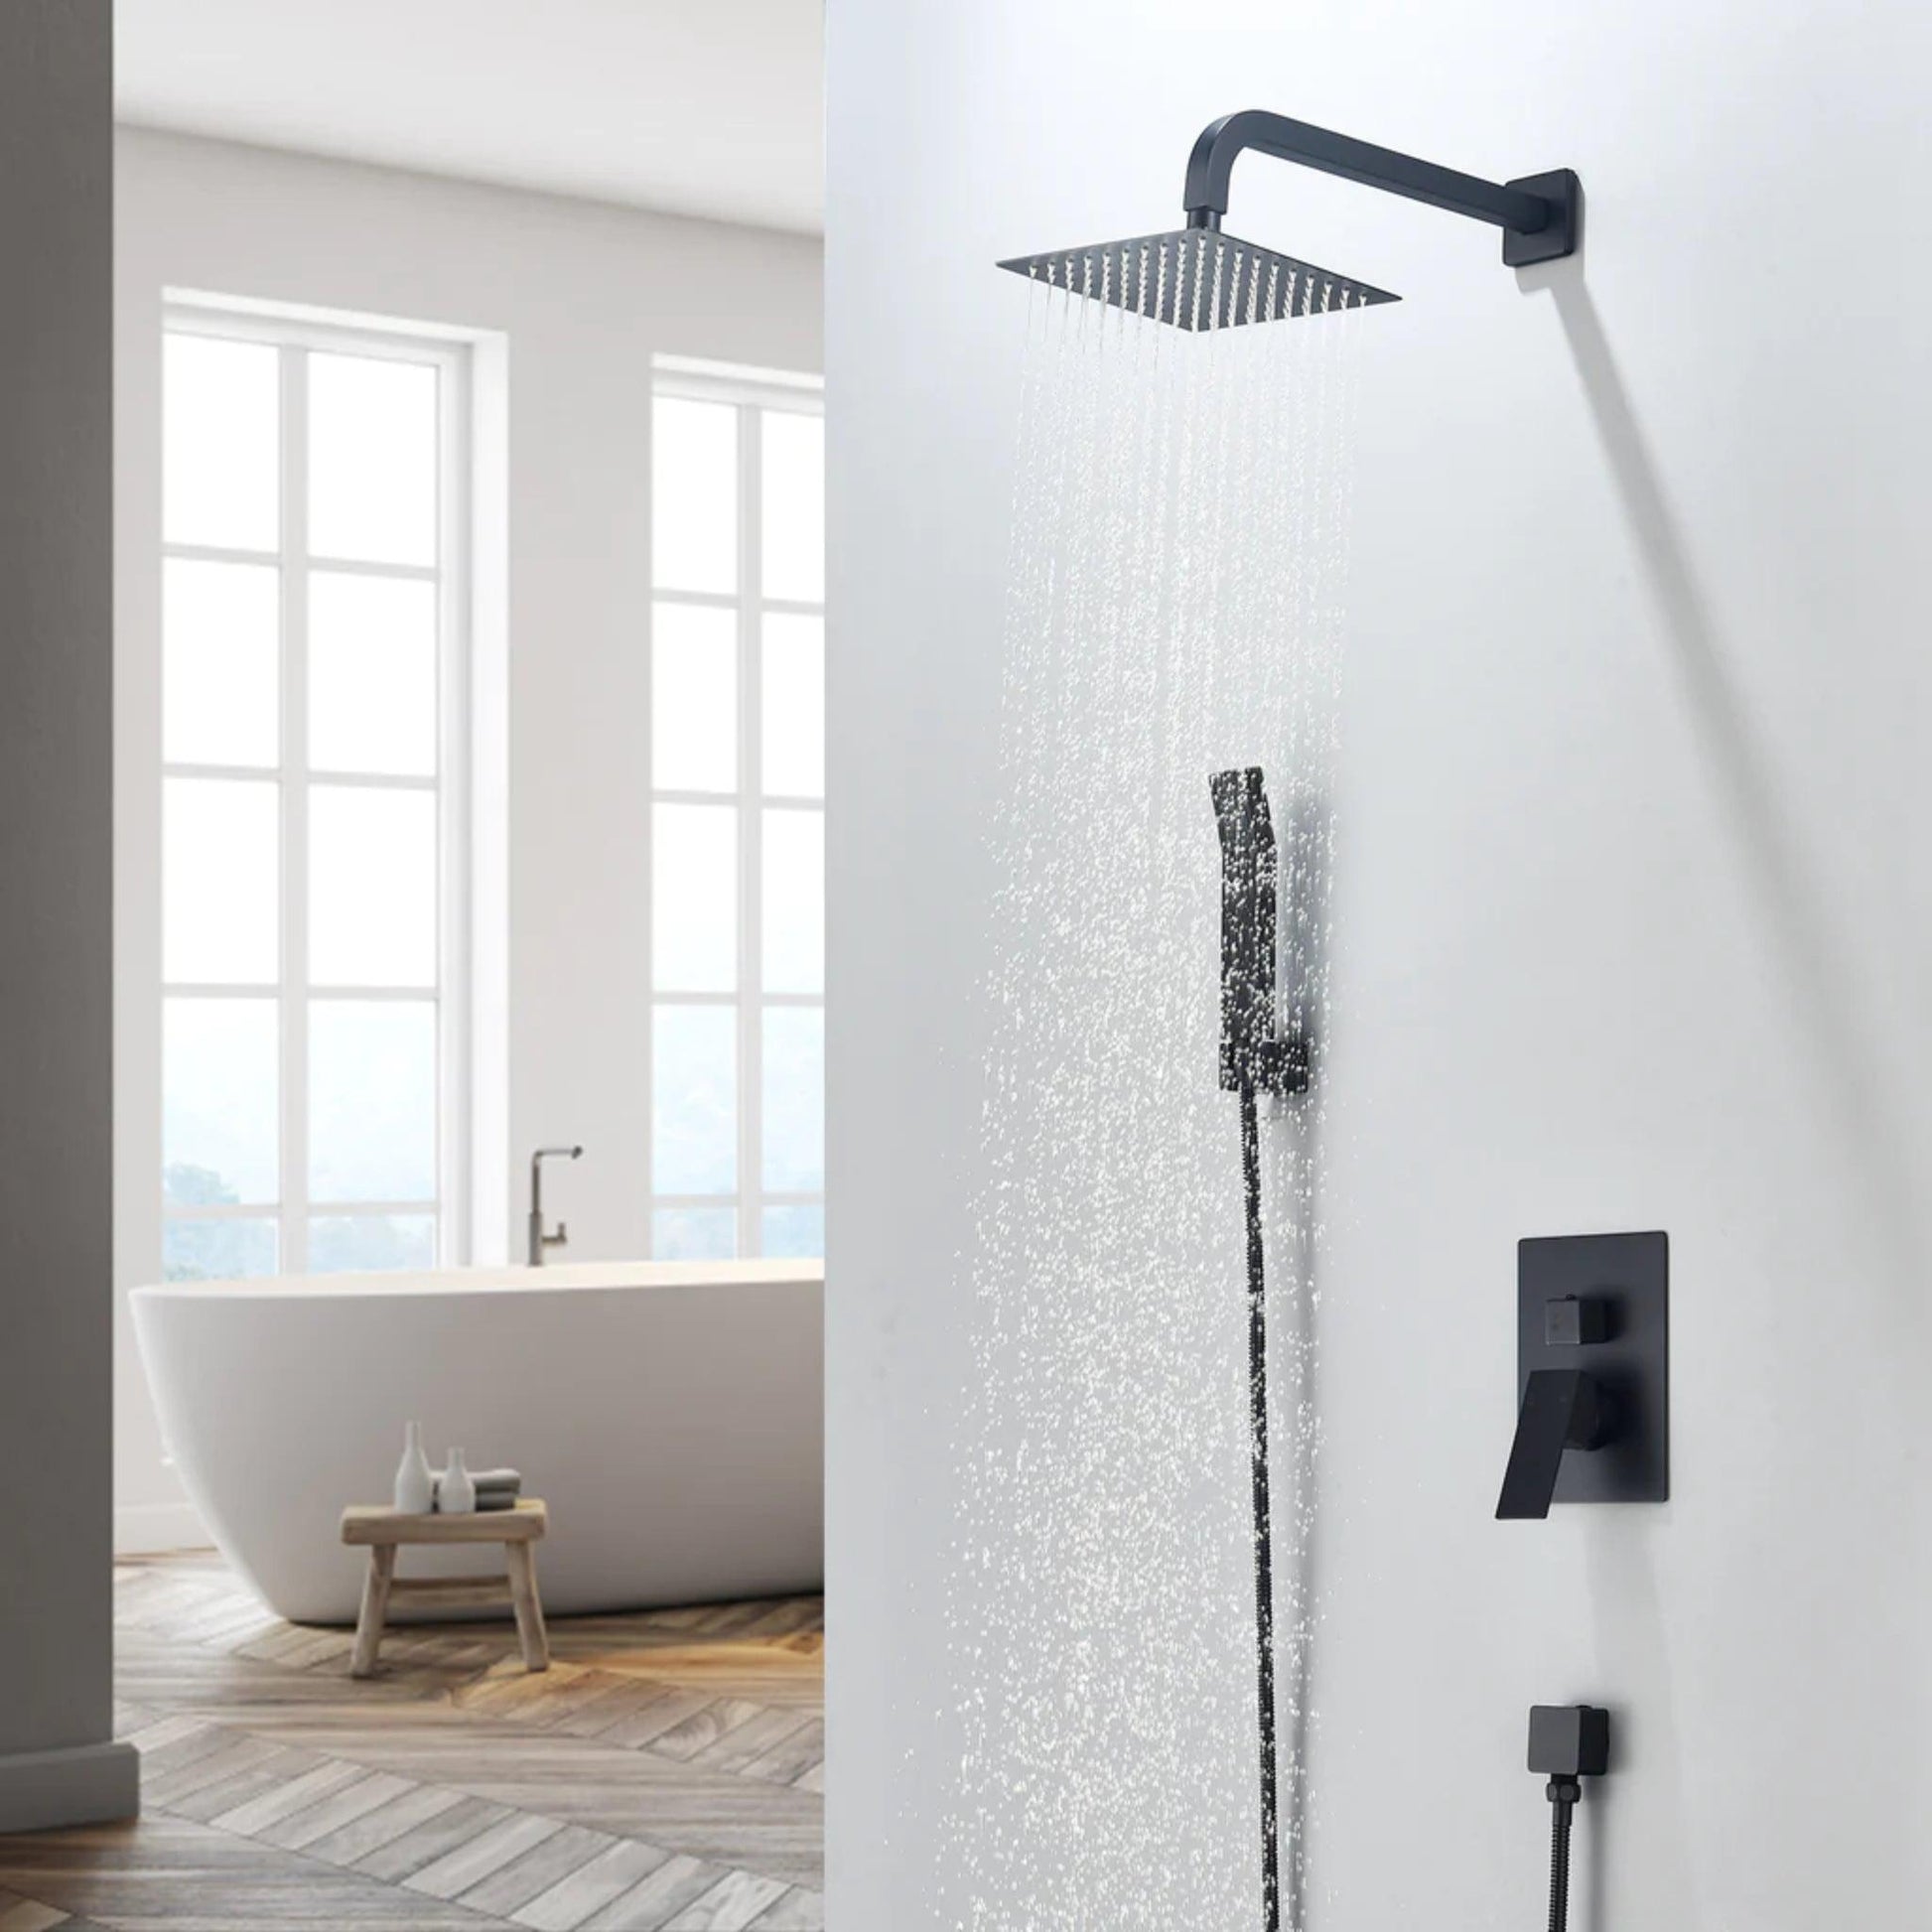 Altair Raeren Matte Black Complete Shower System With 8" Square Rain Shower Head and Rough-In Valve